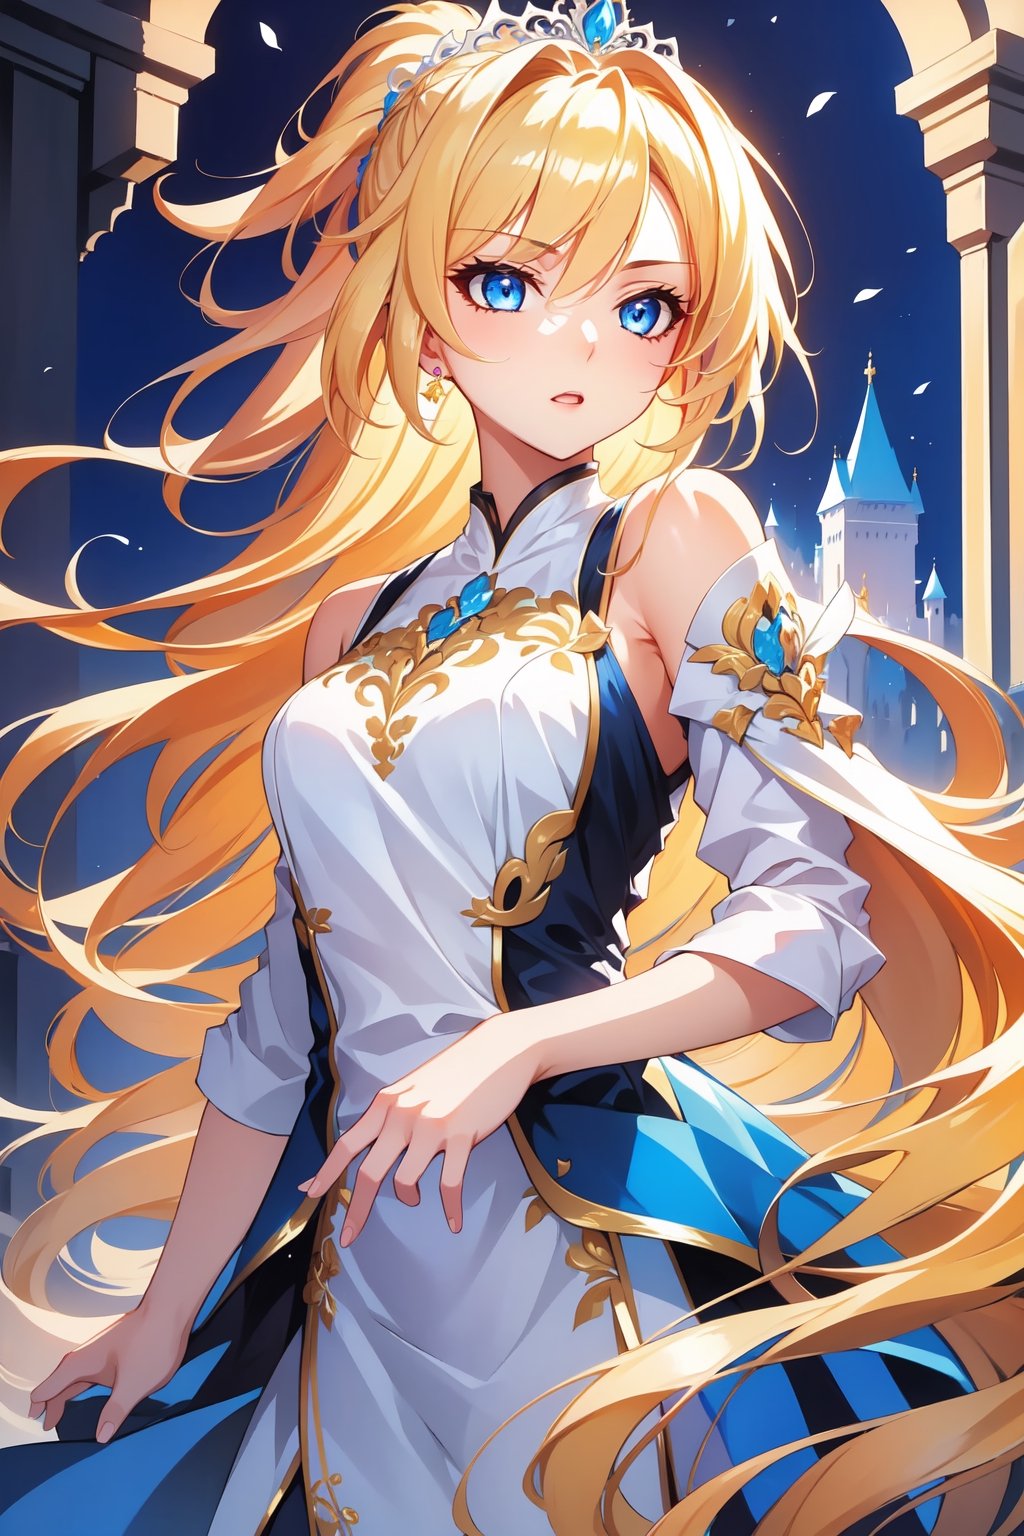 one girl, beautiful hands ,masterpiece,best quality, calca, blonde hair, short hair, medium chest, extremely long hair, very long hair, extra lonh hair, white tiara, white dress, blue eyes, castle in background. ponytail hairstyle